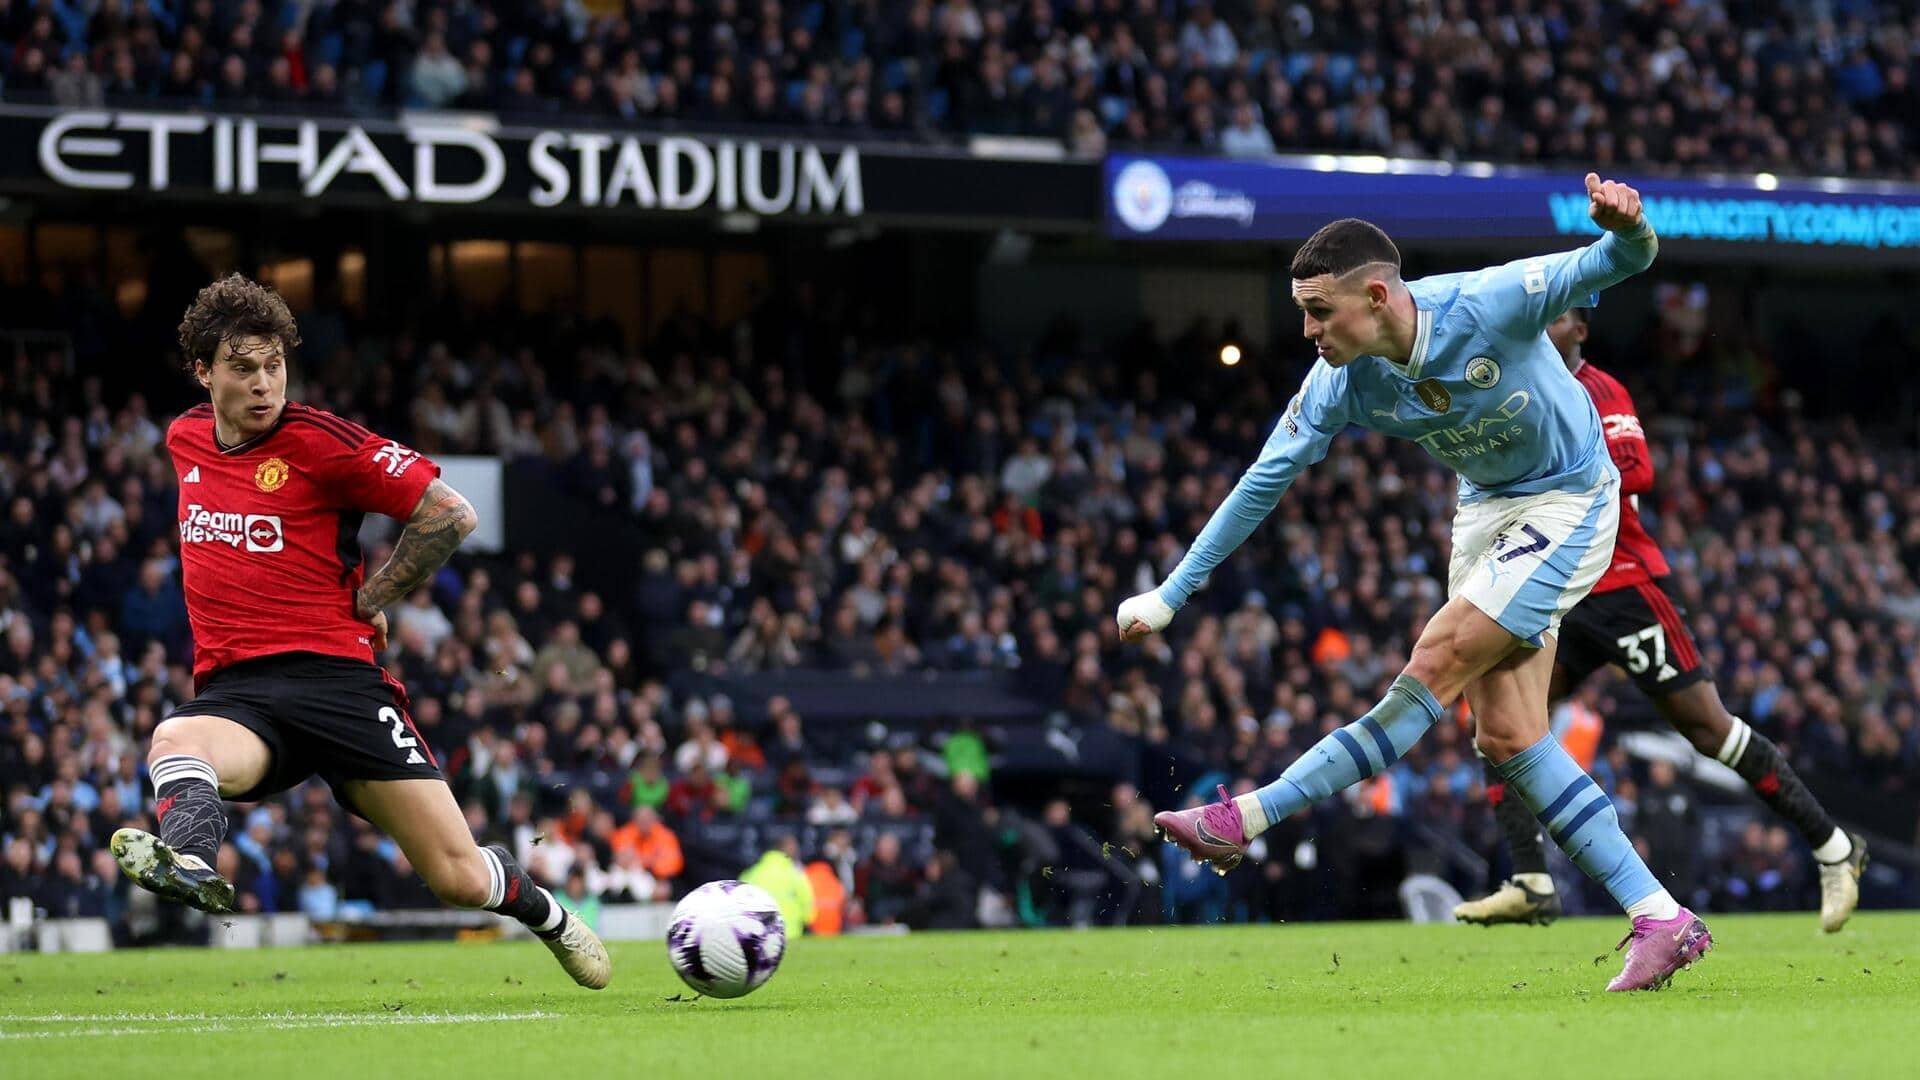 Phil Foden shines as Manchester City beat Manchester United 3-1